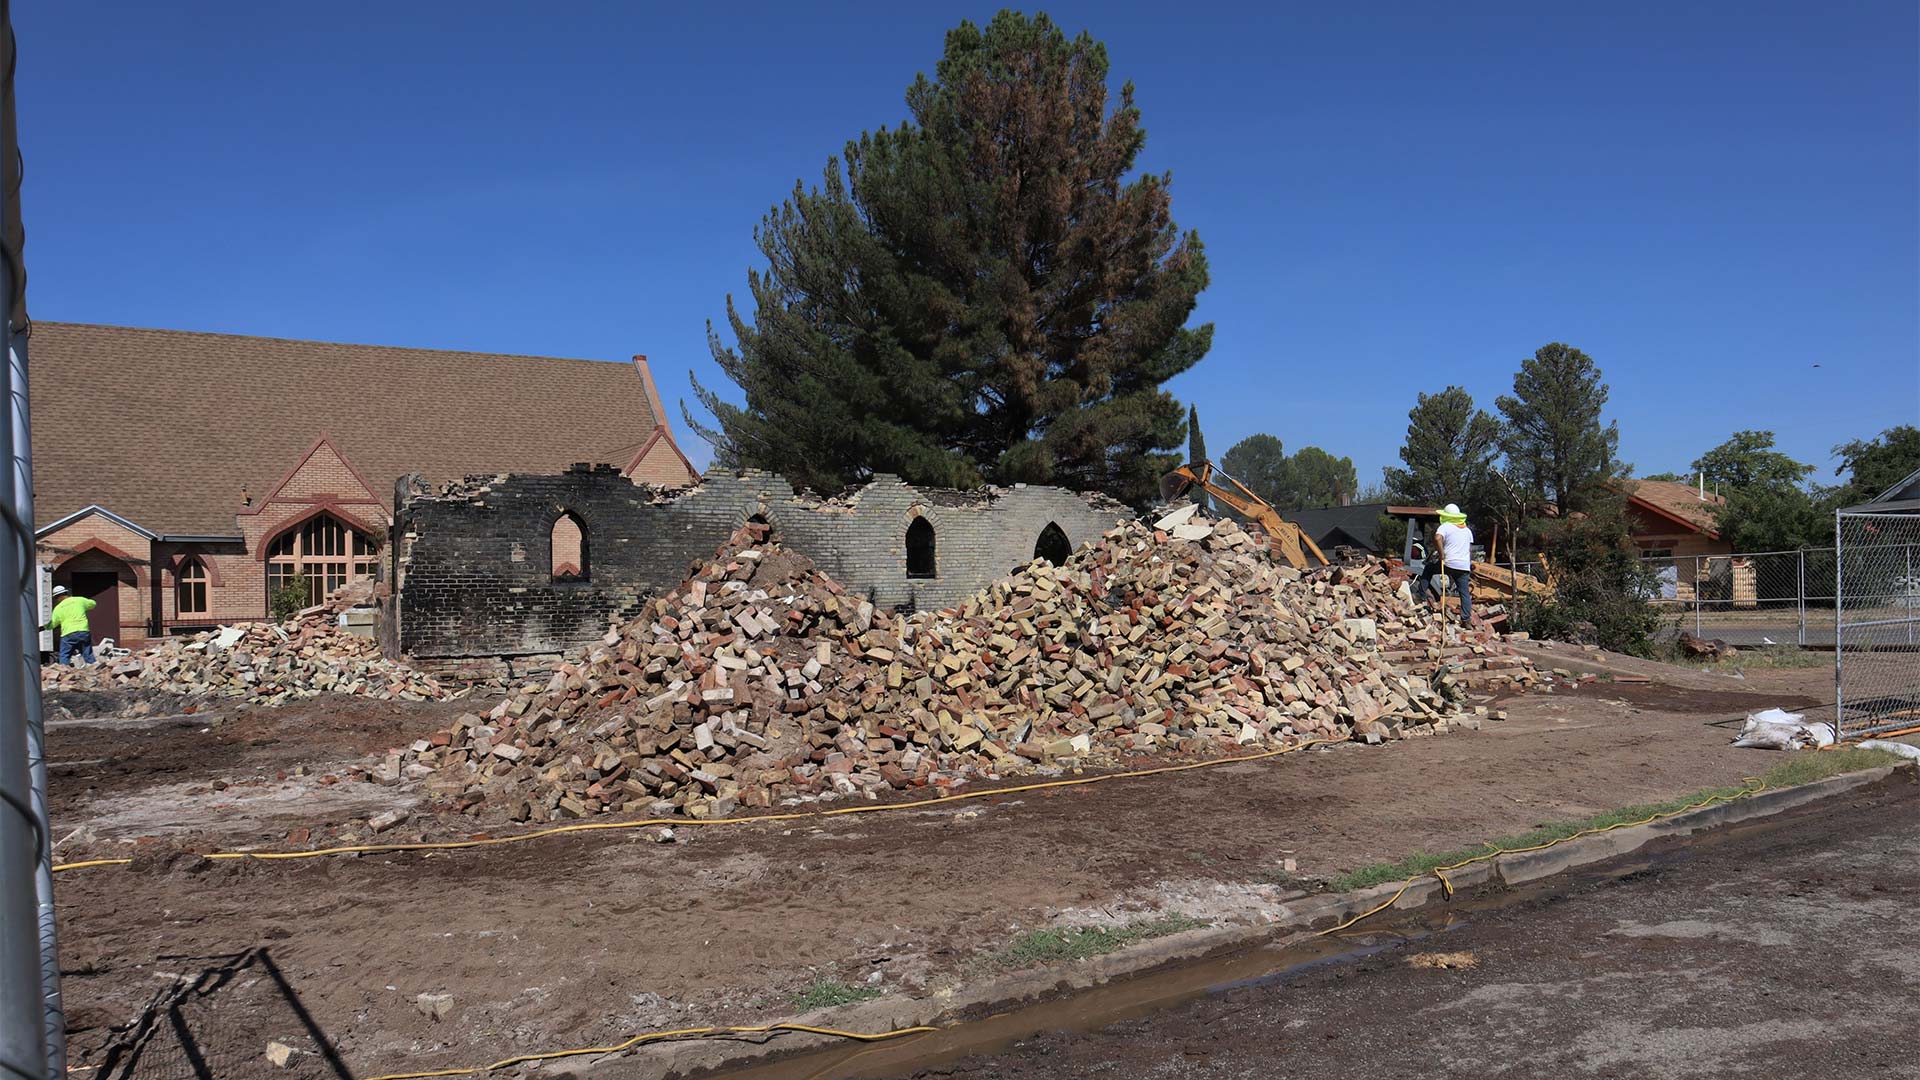 The former Saint Stephen's Episcopal Church in Douglas, AZ. The church was one of two prey to fire damage due to suspected arson. August 31, 2023. *Photo by Summer Hom, AZPM News.*